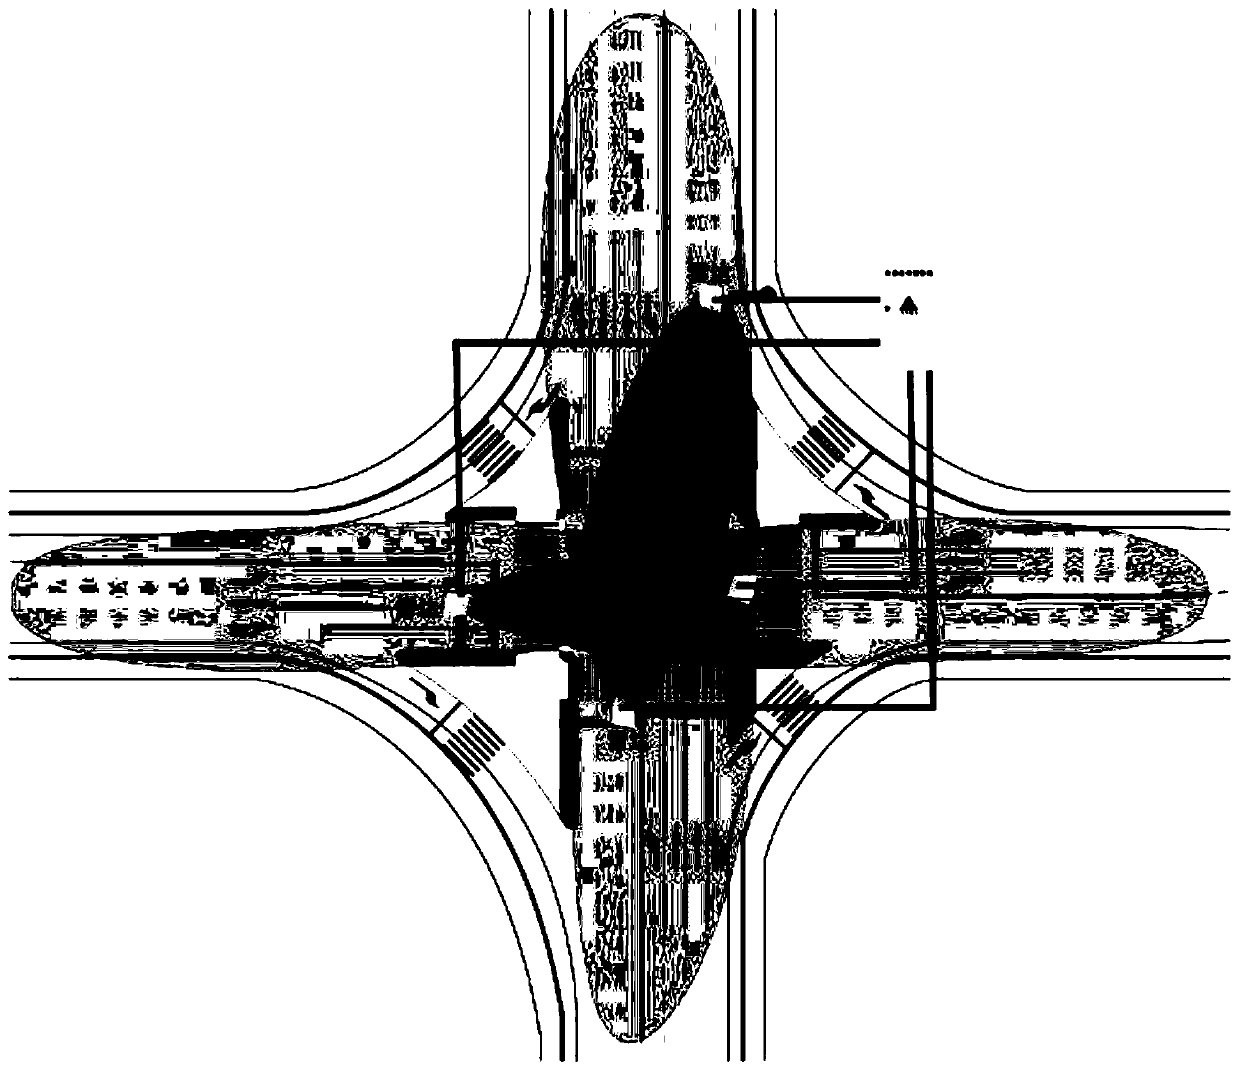 System of detecting and optimizing traffic control by using three-coordinate radar